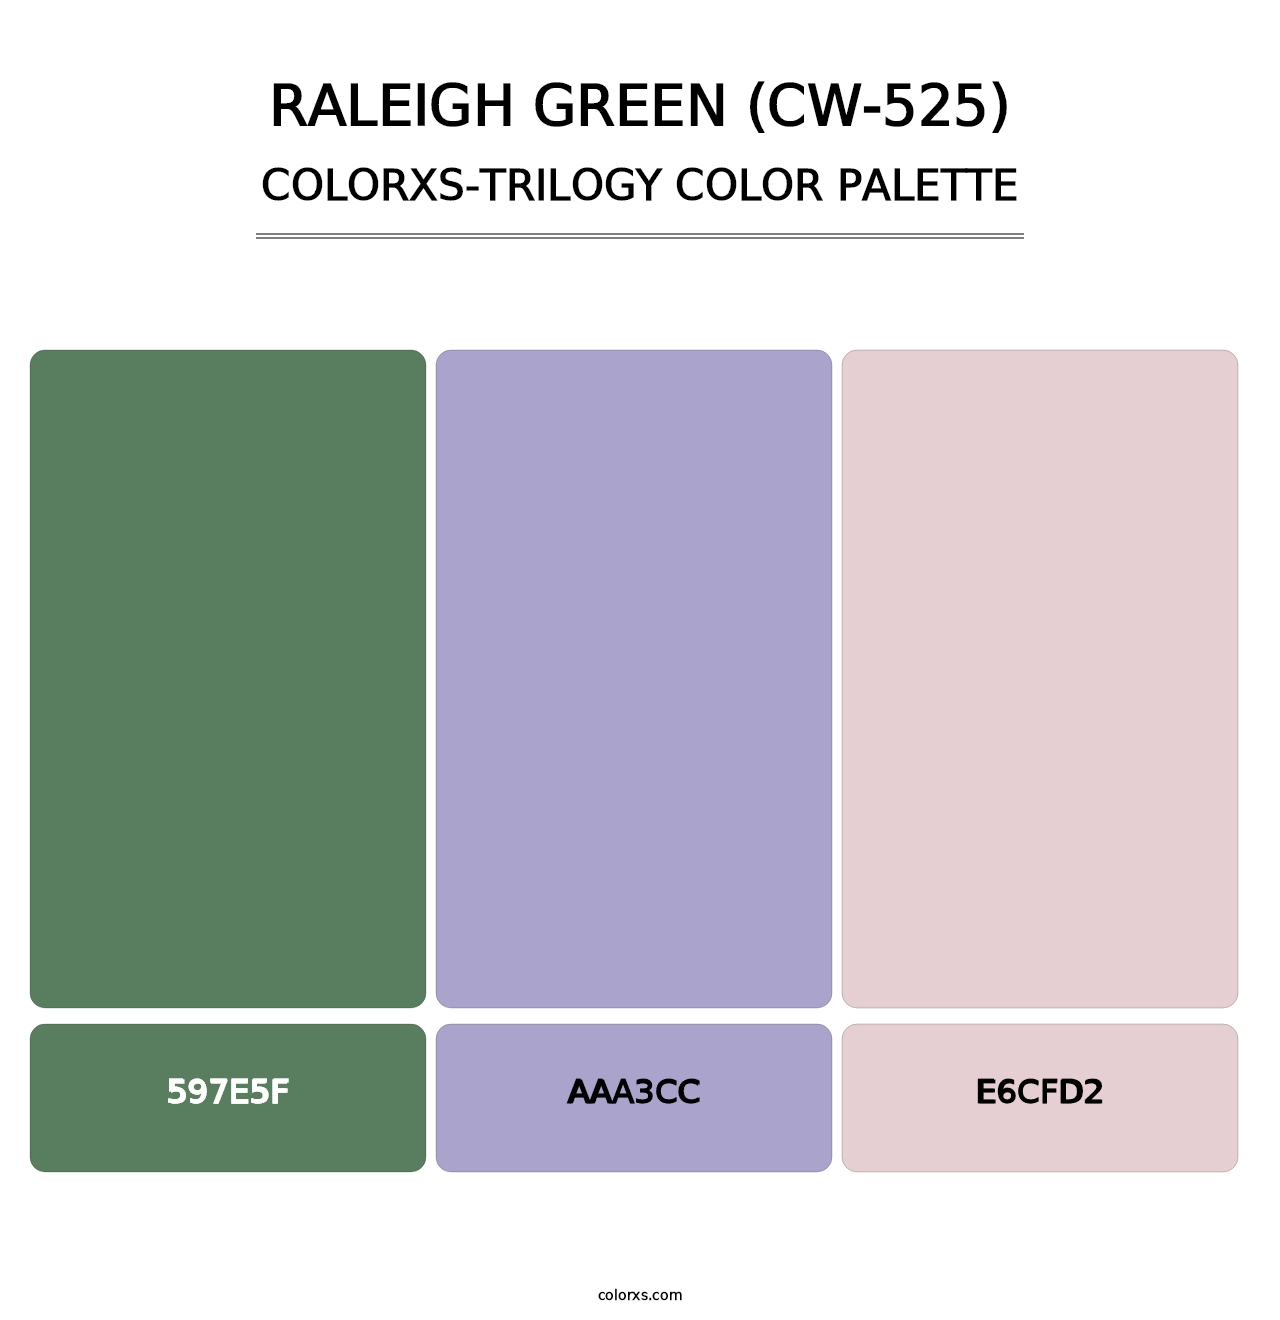 Raleigh Green (CW-525) - Colorxs Trilogy Palette